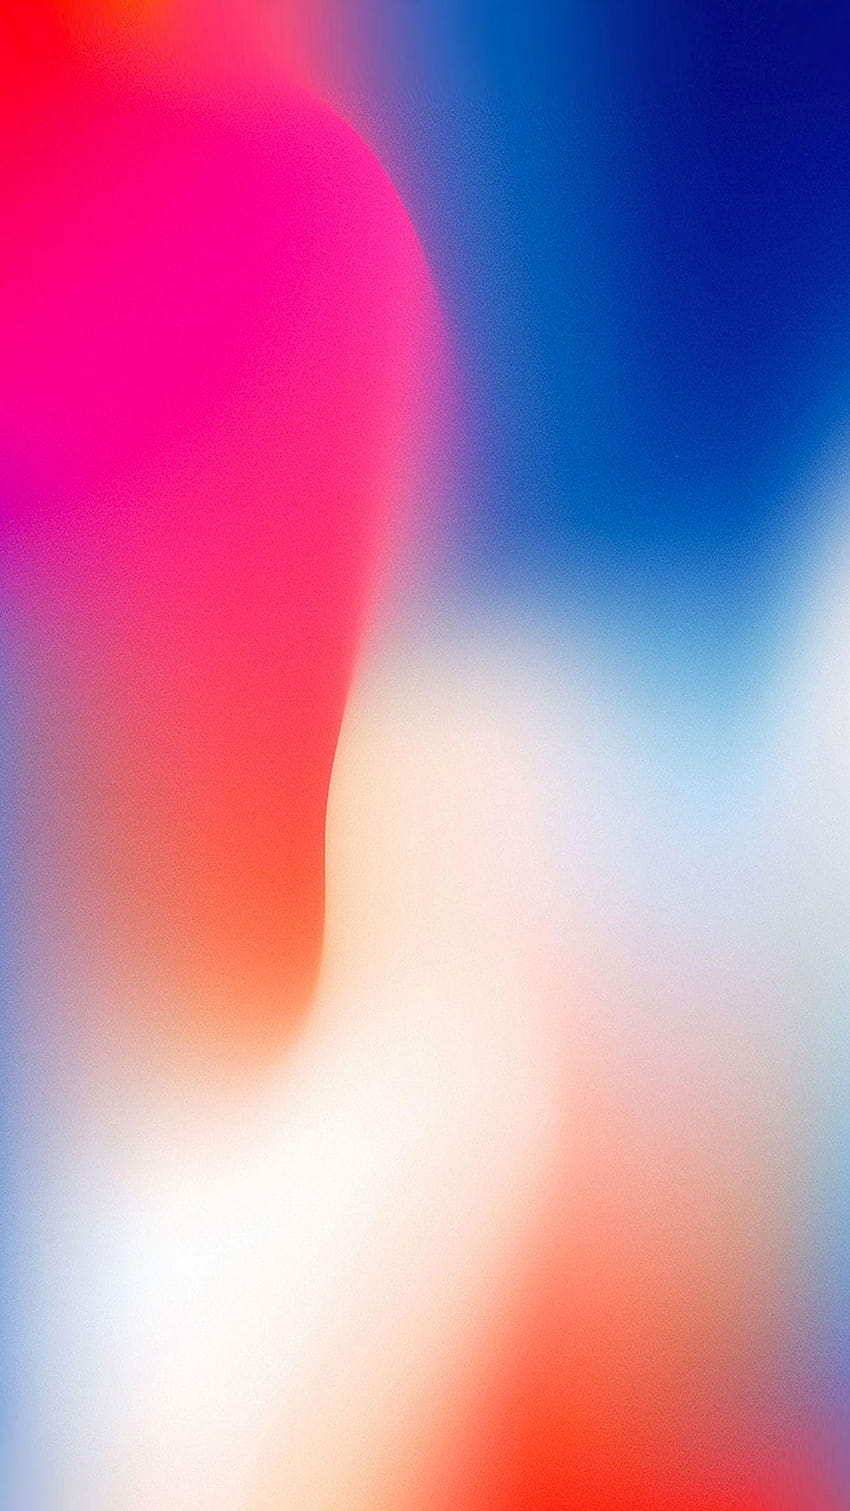 IPhone X for, apple iphone x HD phone wallpaper | Pxfuel